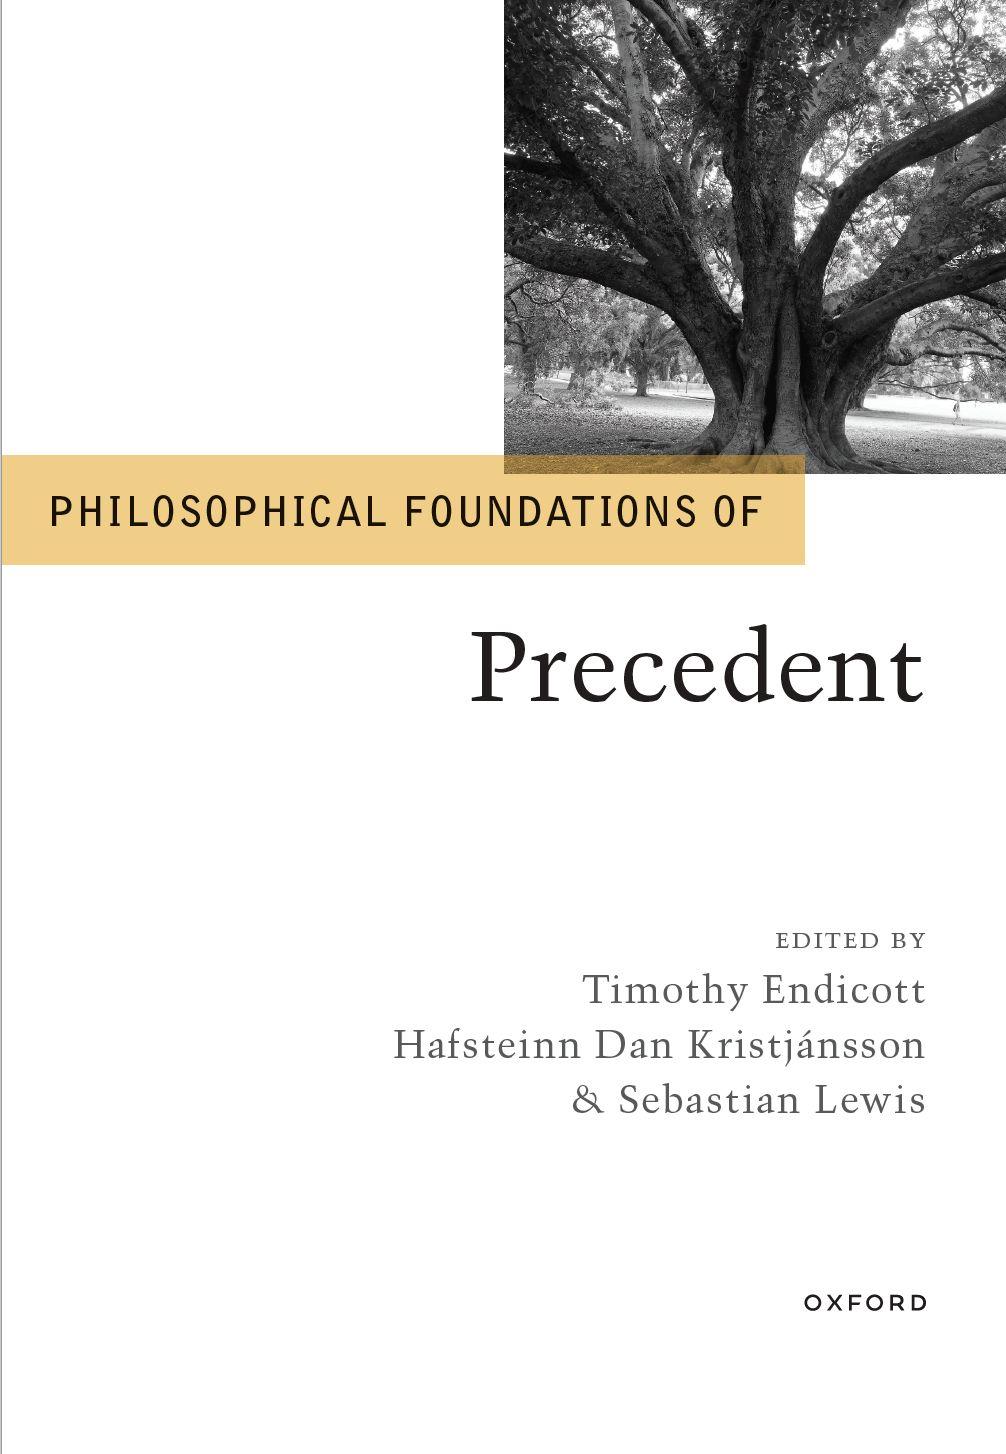 Philosophical Foundations of Precedent (OUP 2023)